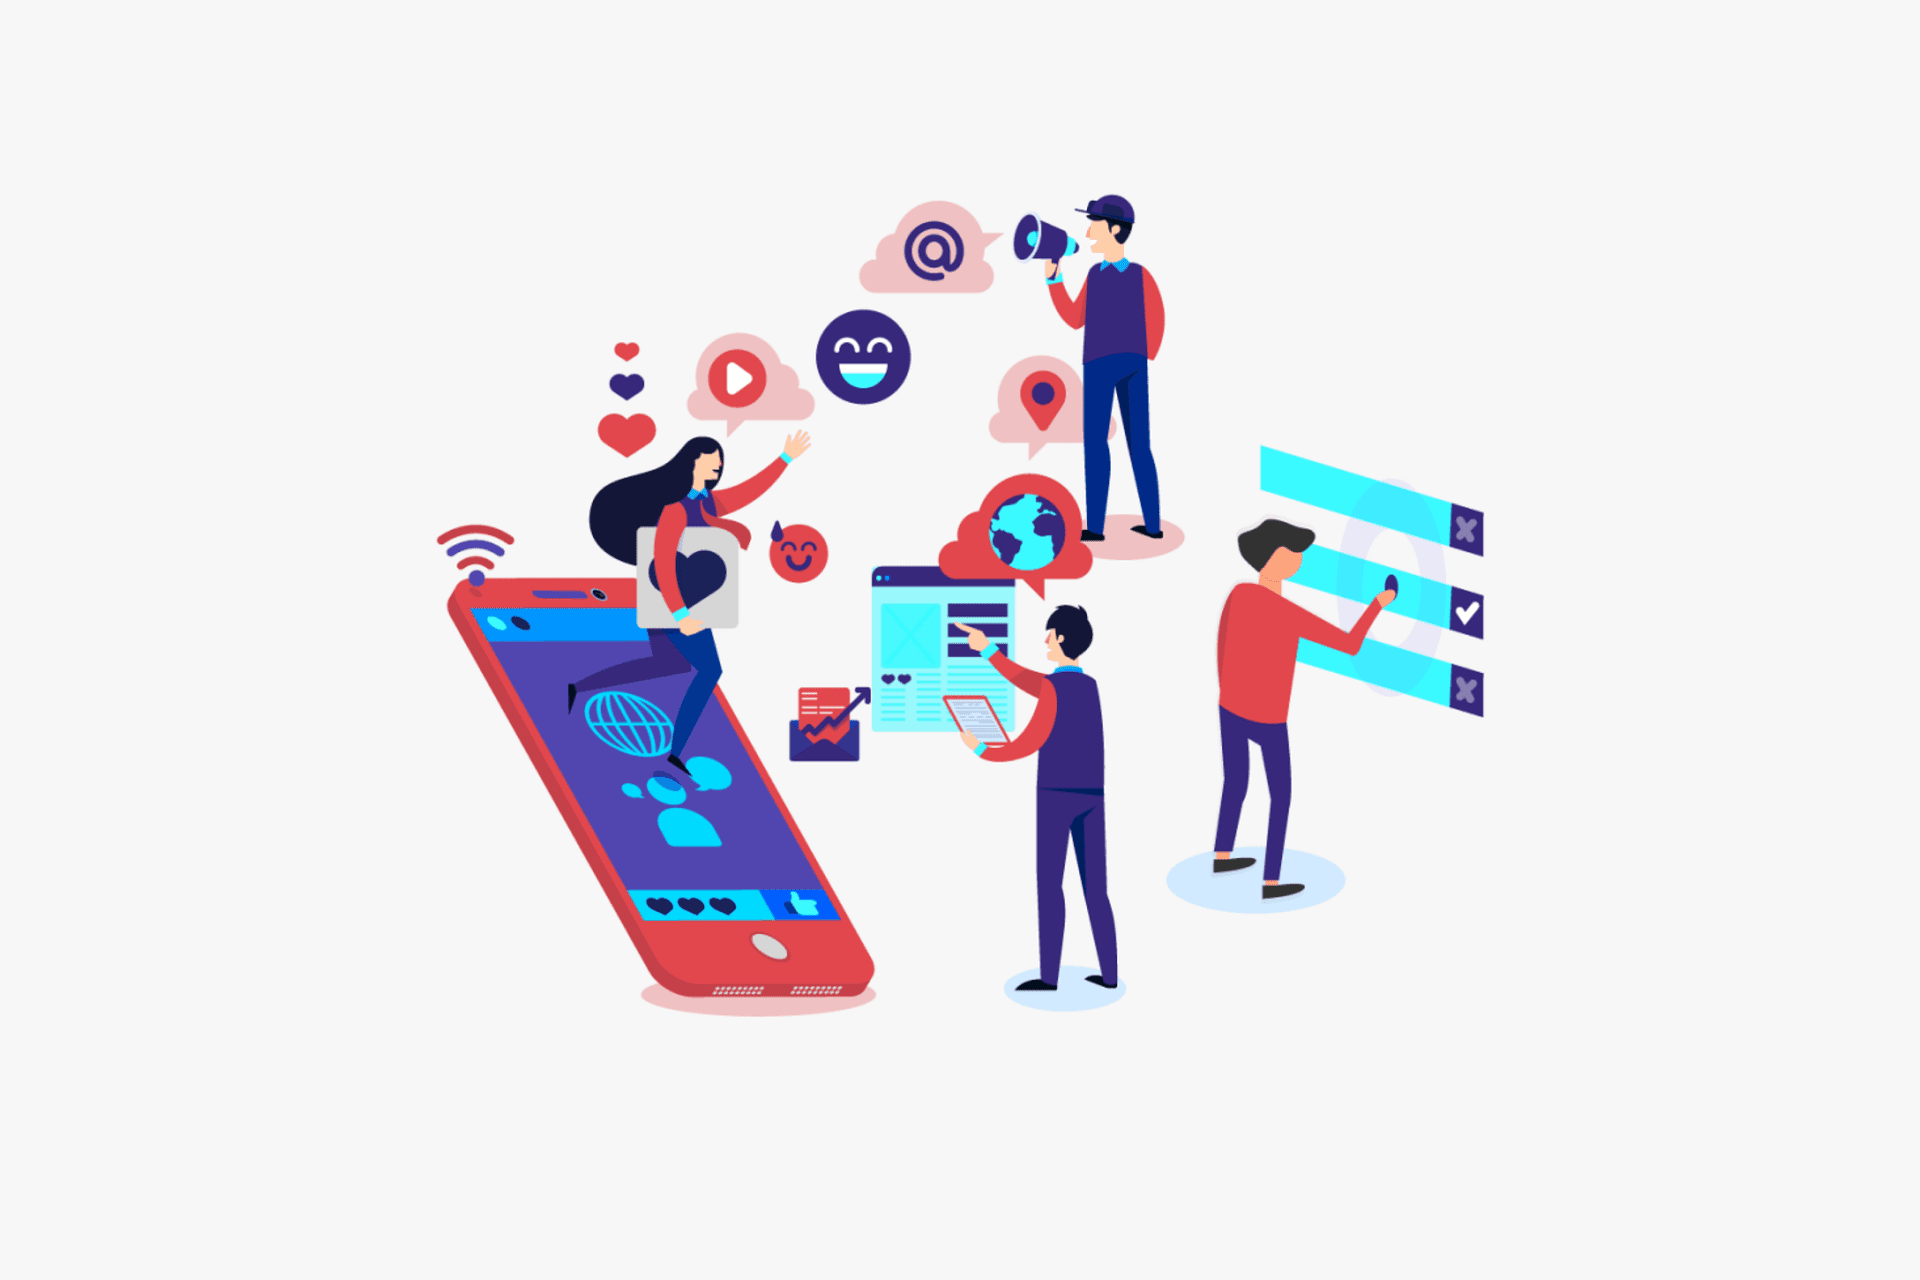 Illustration of people with phones, social network icons and statistics icons. Digiboost offers multilingual marketing services for your business to reach a broader audience.